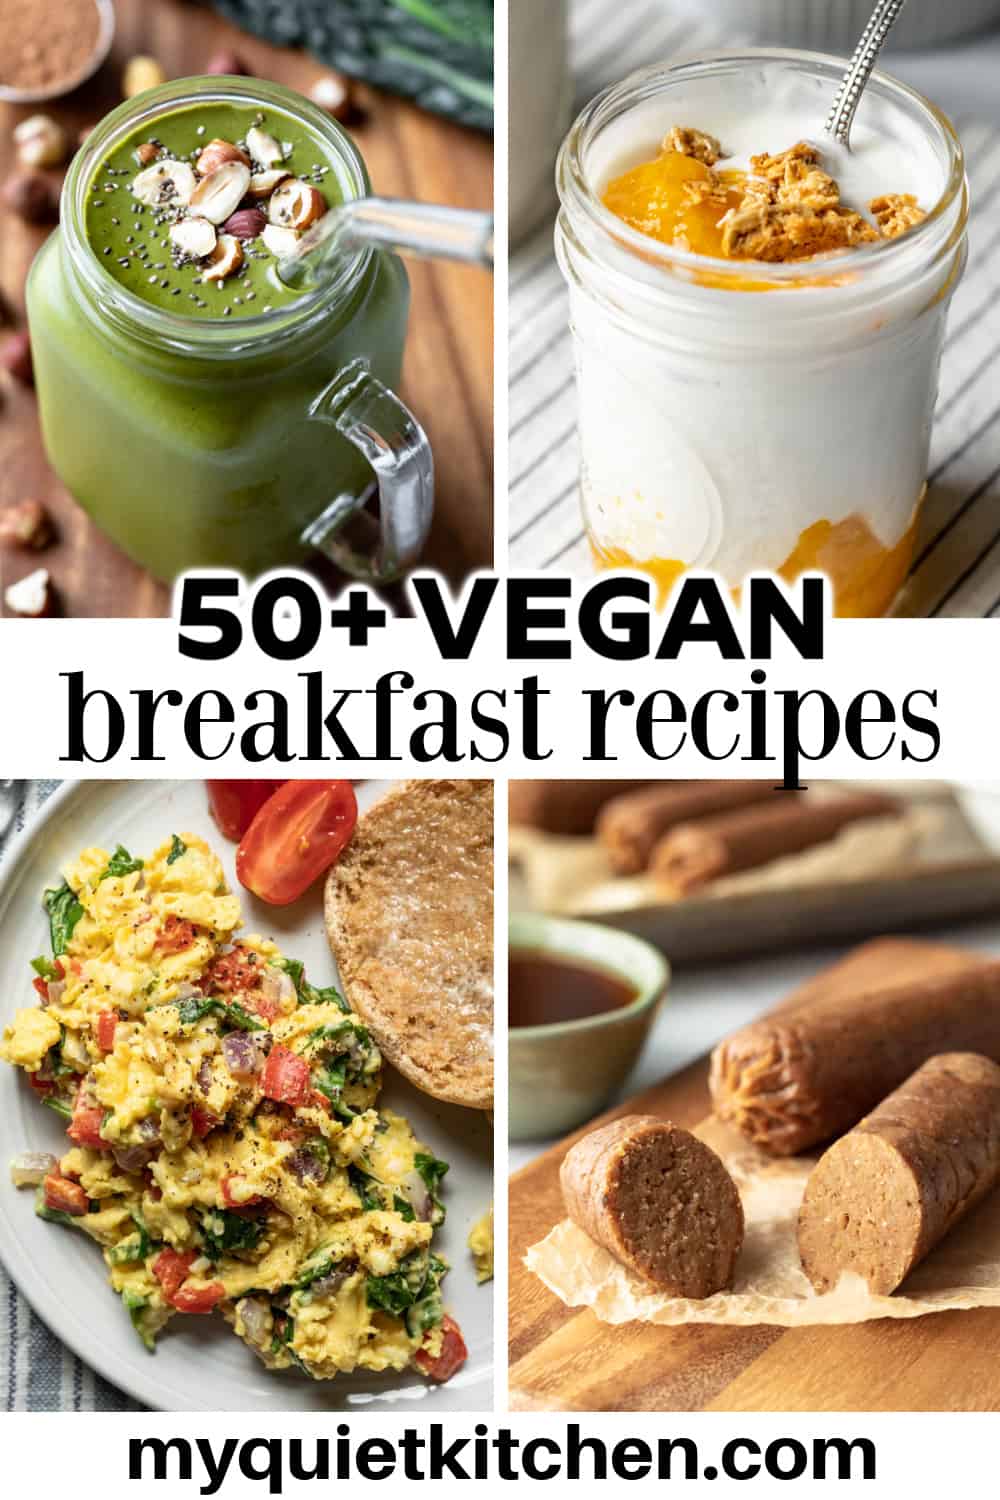 4 photos of different vegan breakfast recipes with test overlay to save on Pinterest.